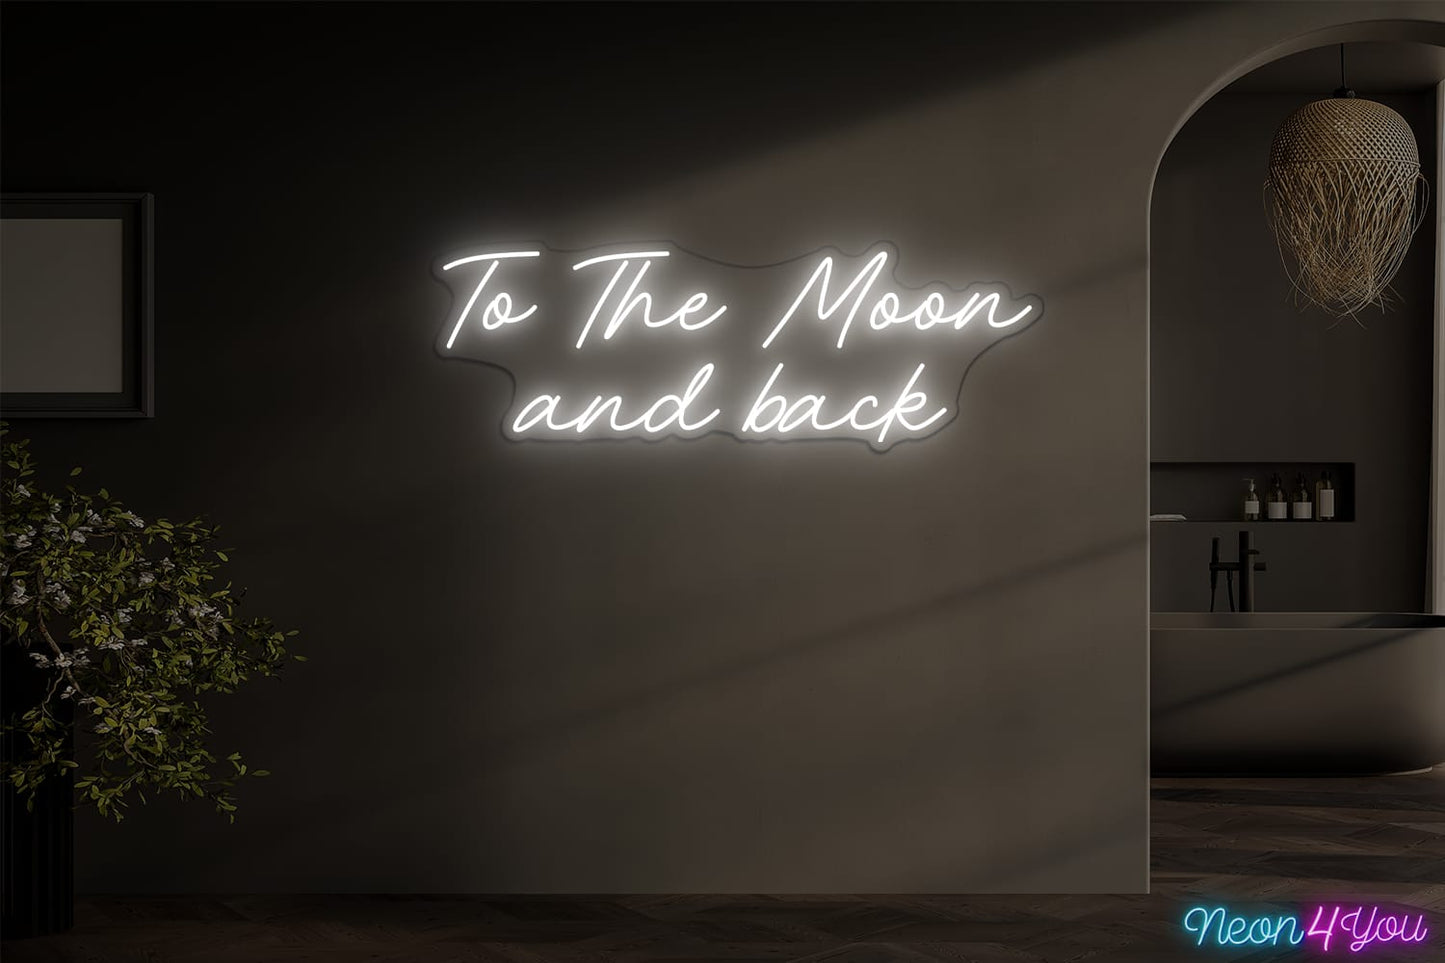 To The Moon and back